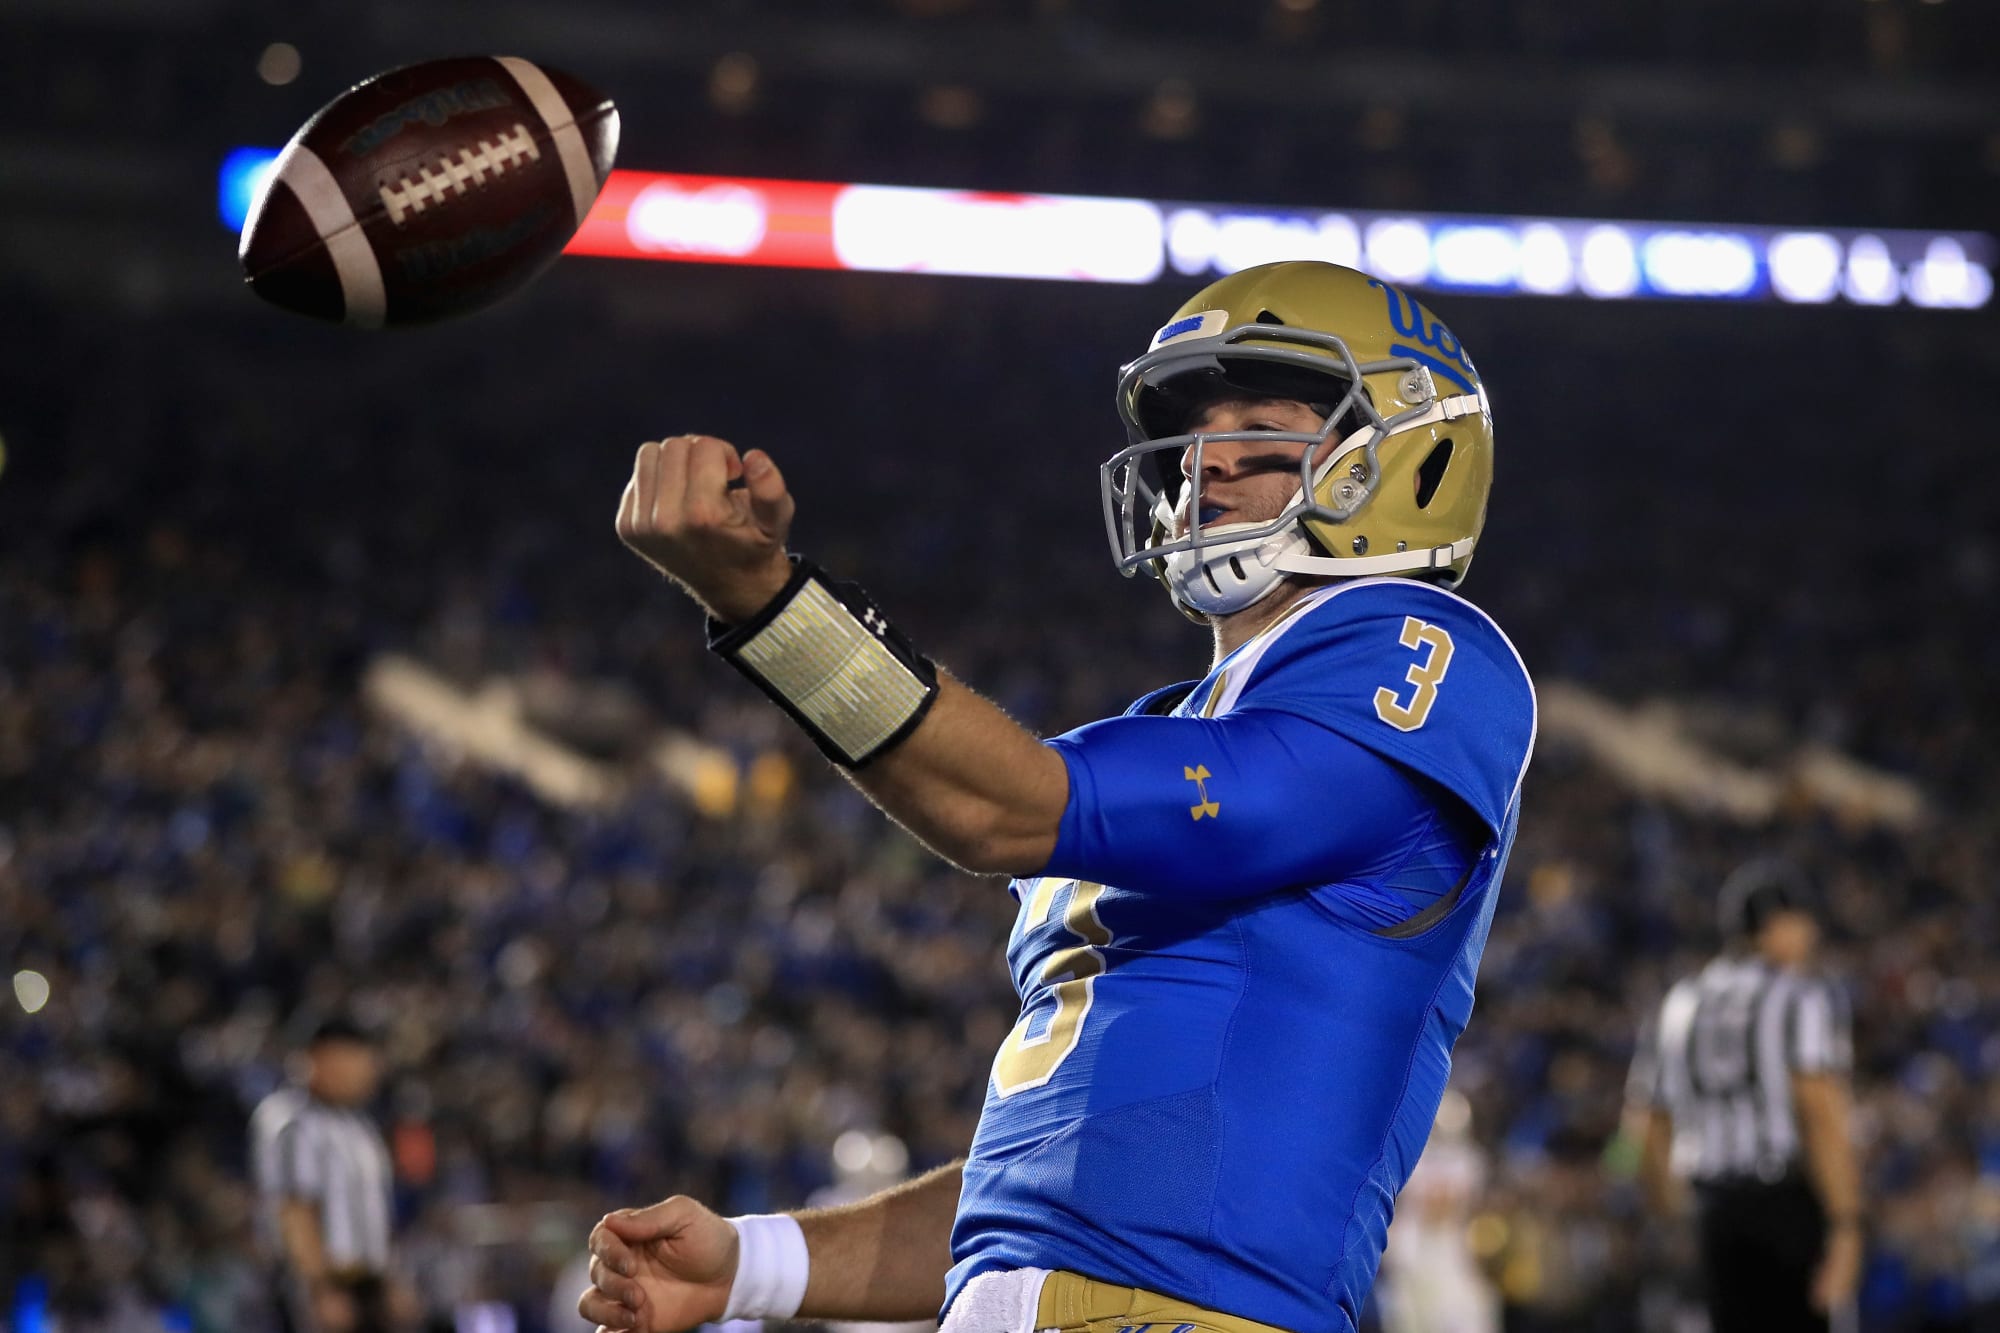 UCLA Football Bowl eligibility in sight after win over ASU; USC, Cal next